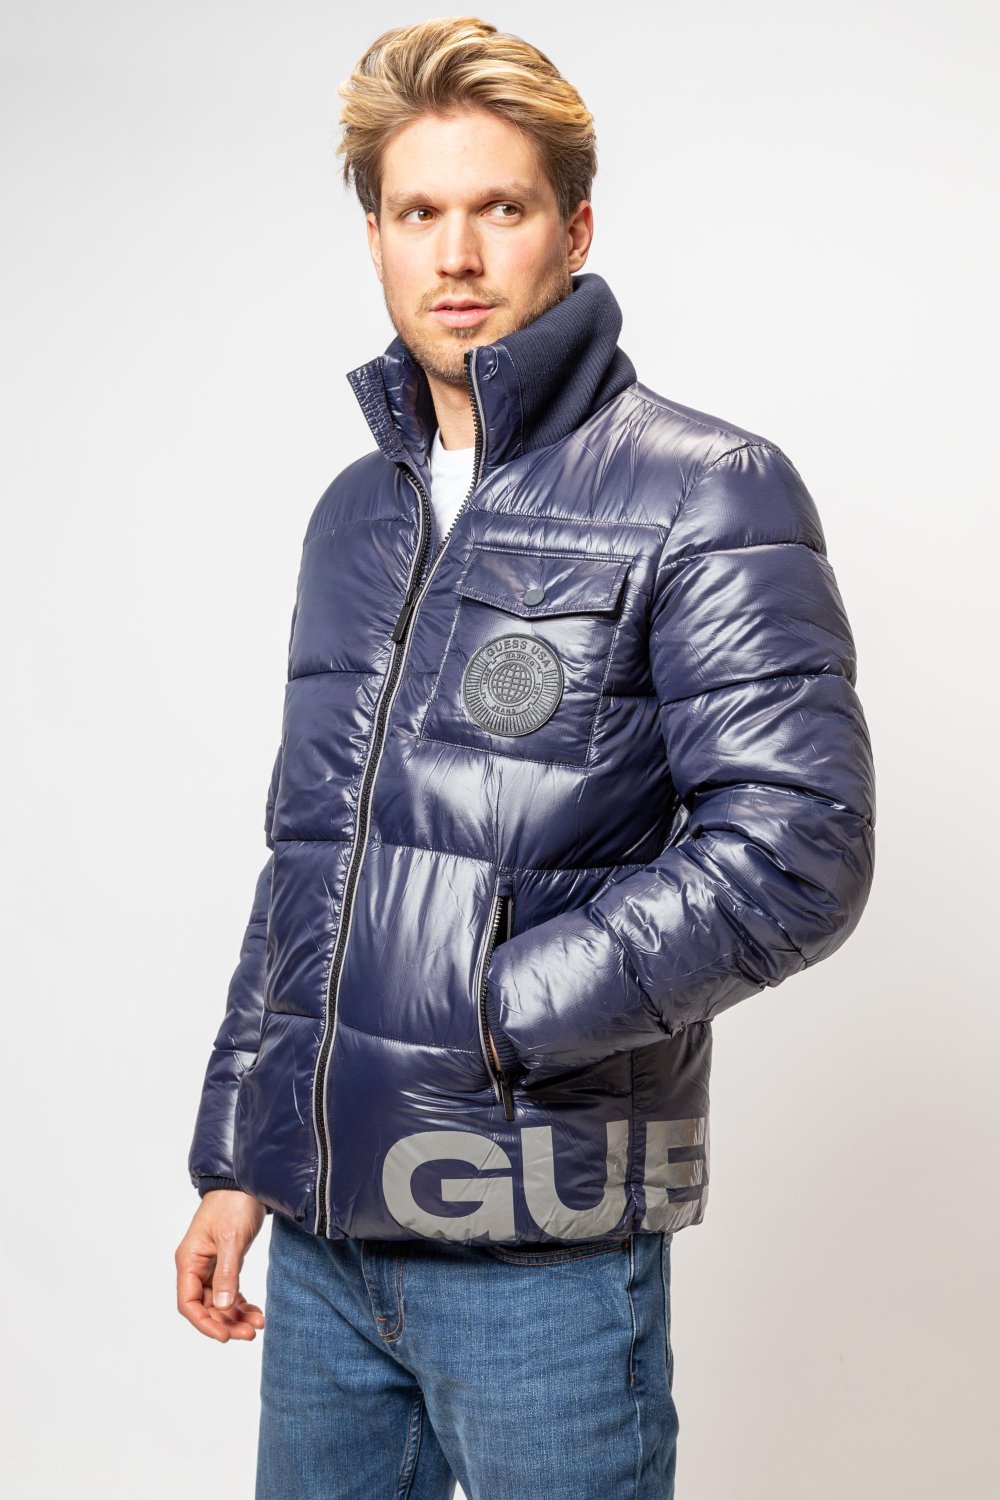 Guess jacket - Griff Webshop